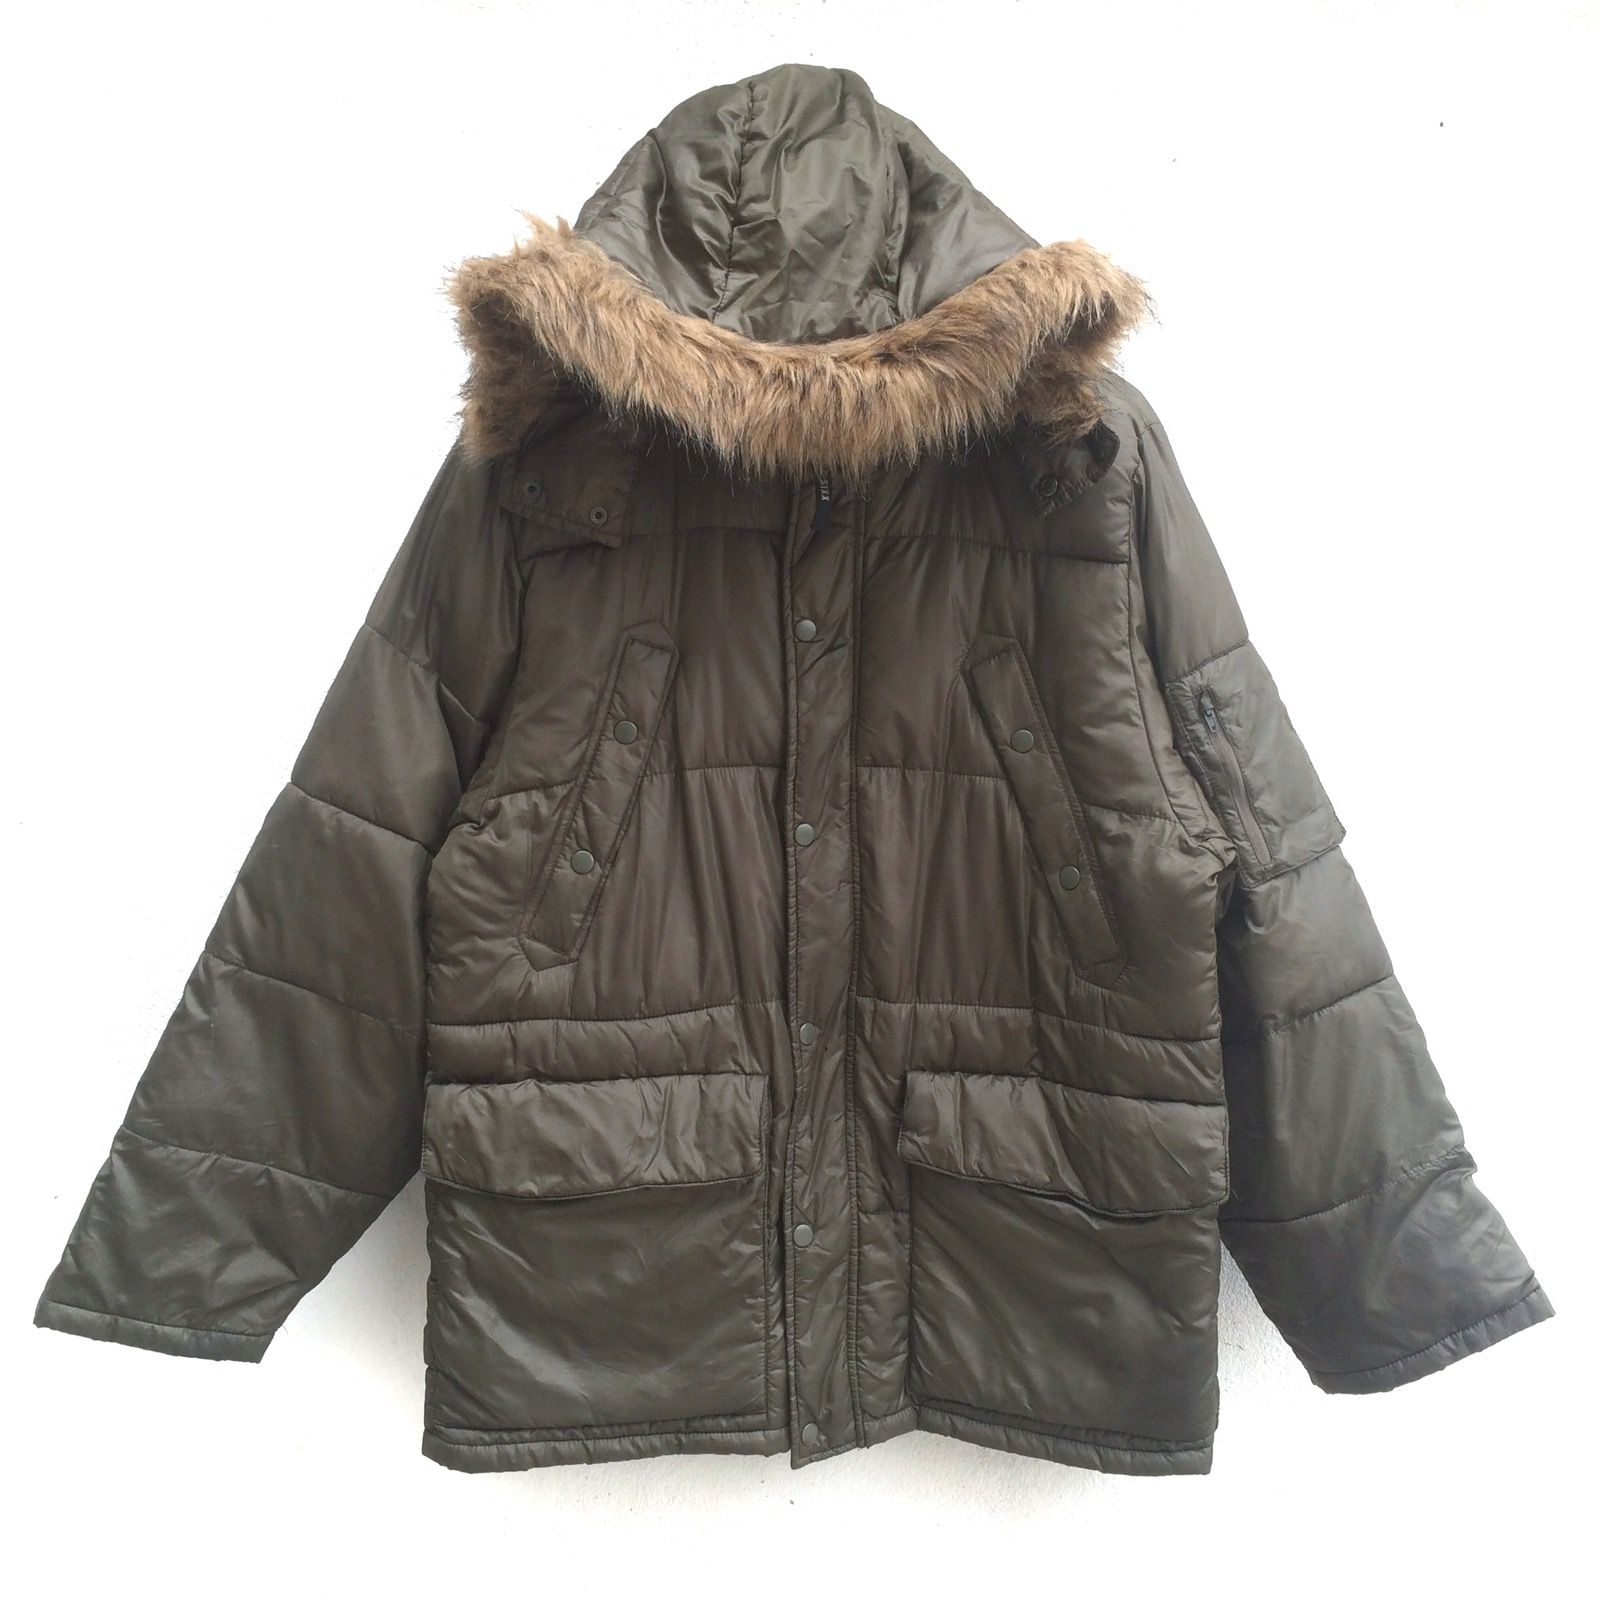 Japanese Brand Made in Japan Neo-Sixx Hooded Pockets Puffer Down Jacket ...